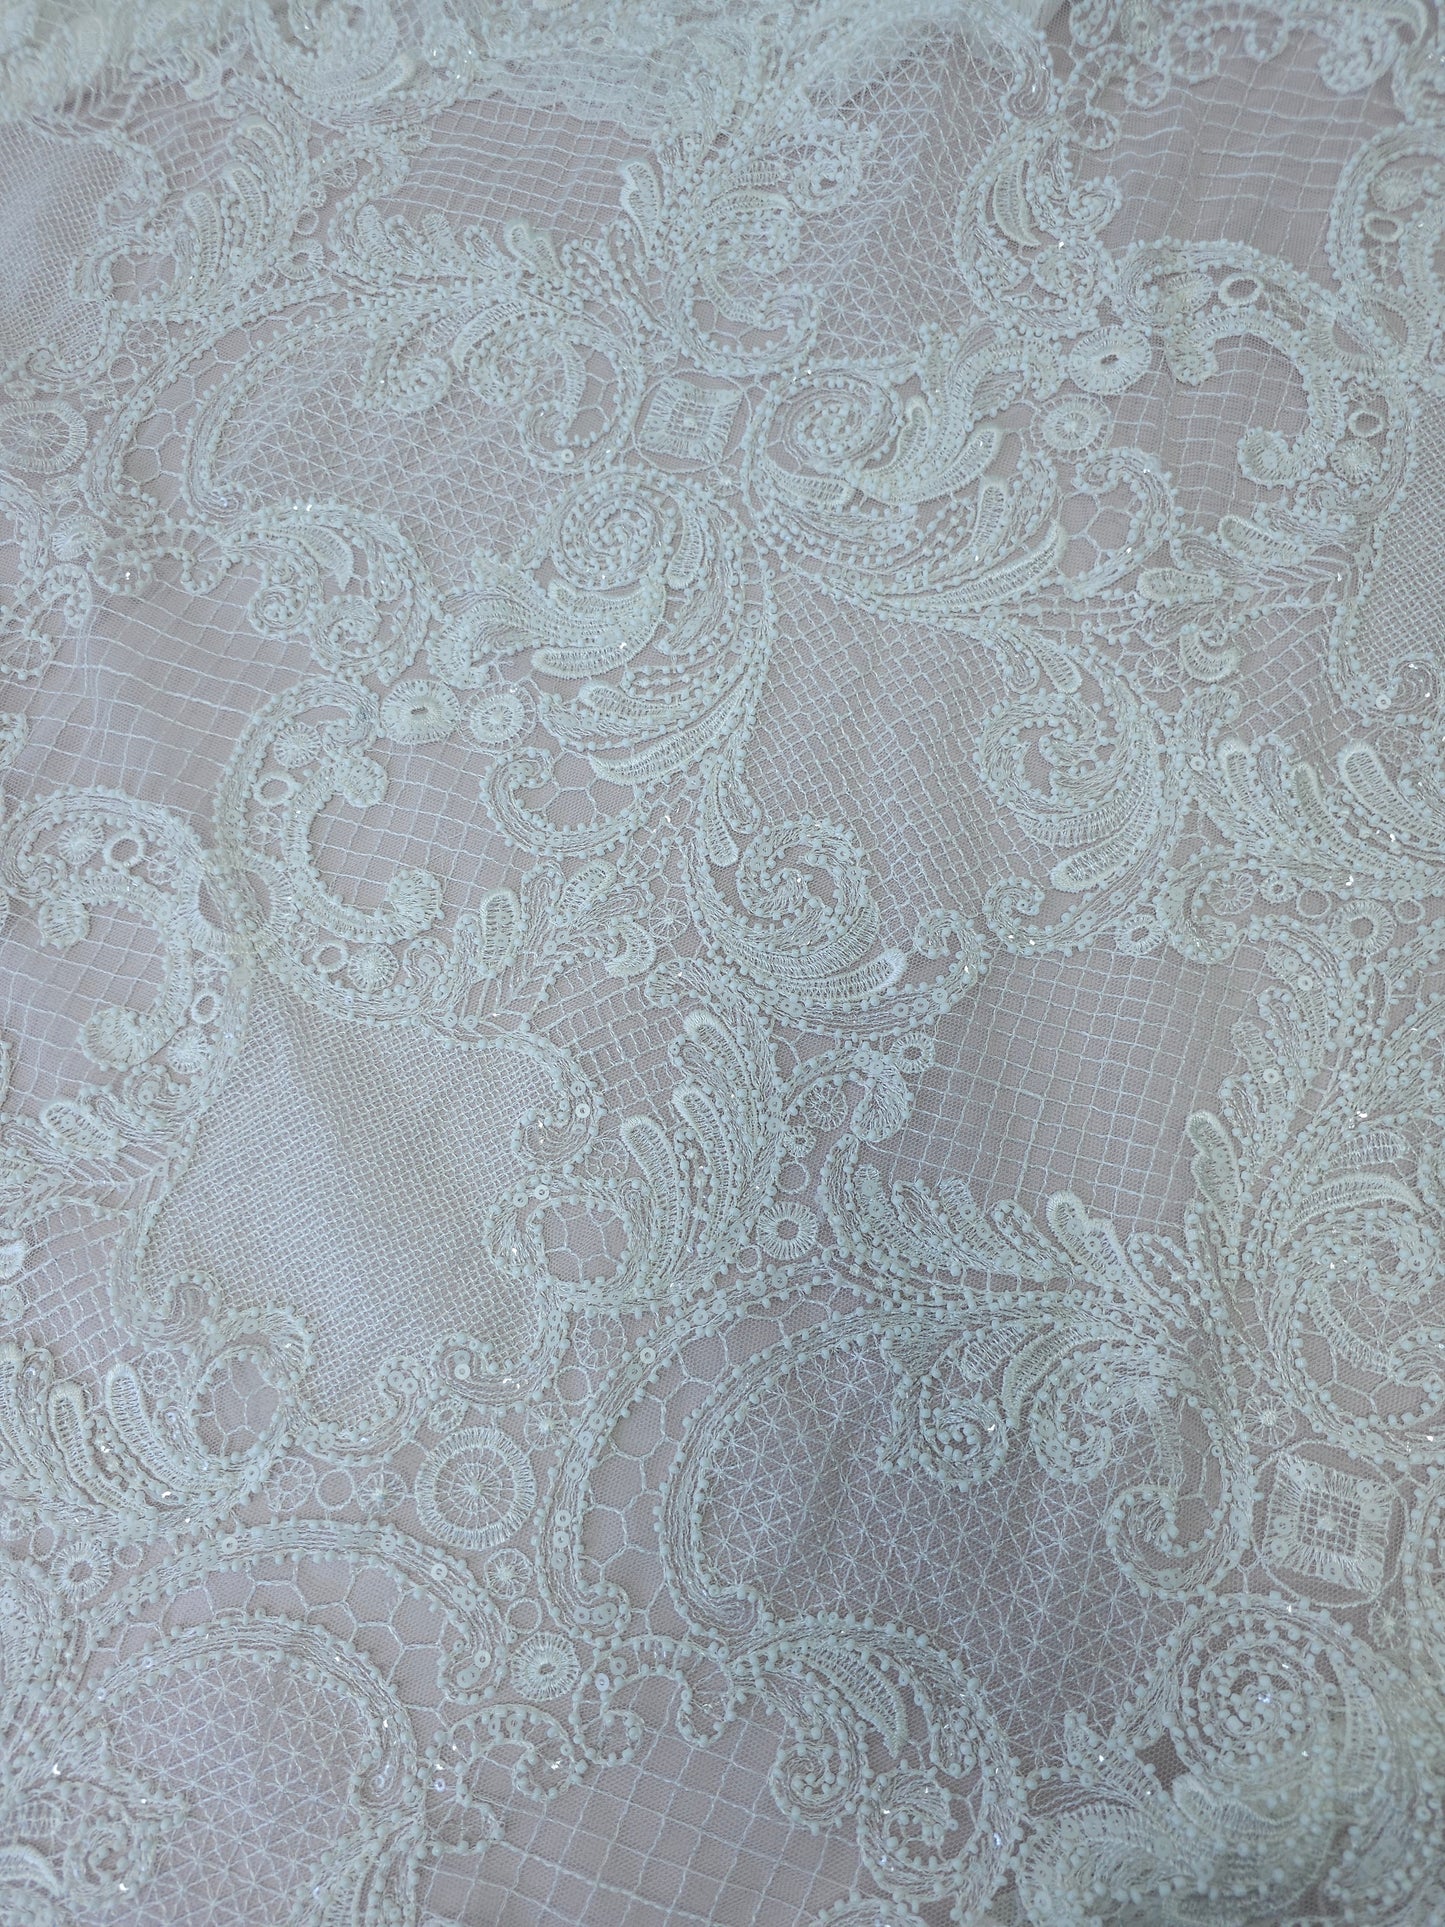 *Lillie* Embroidered Damask Beaded Lace